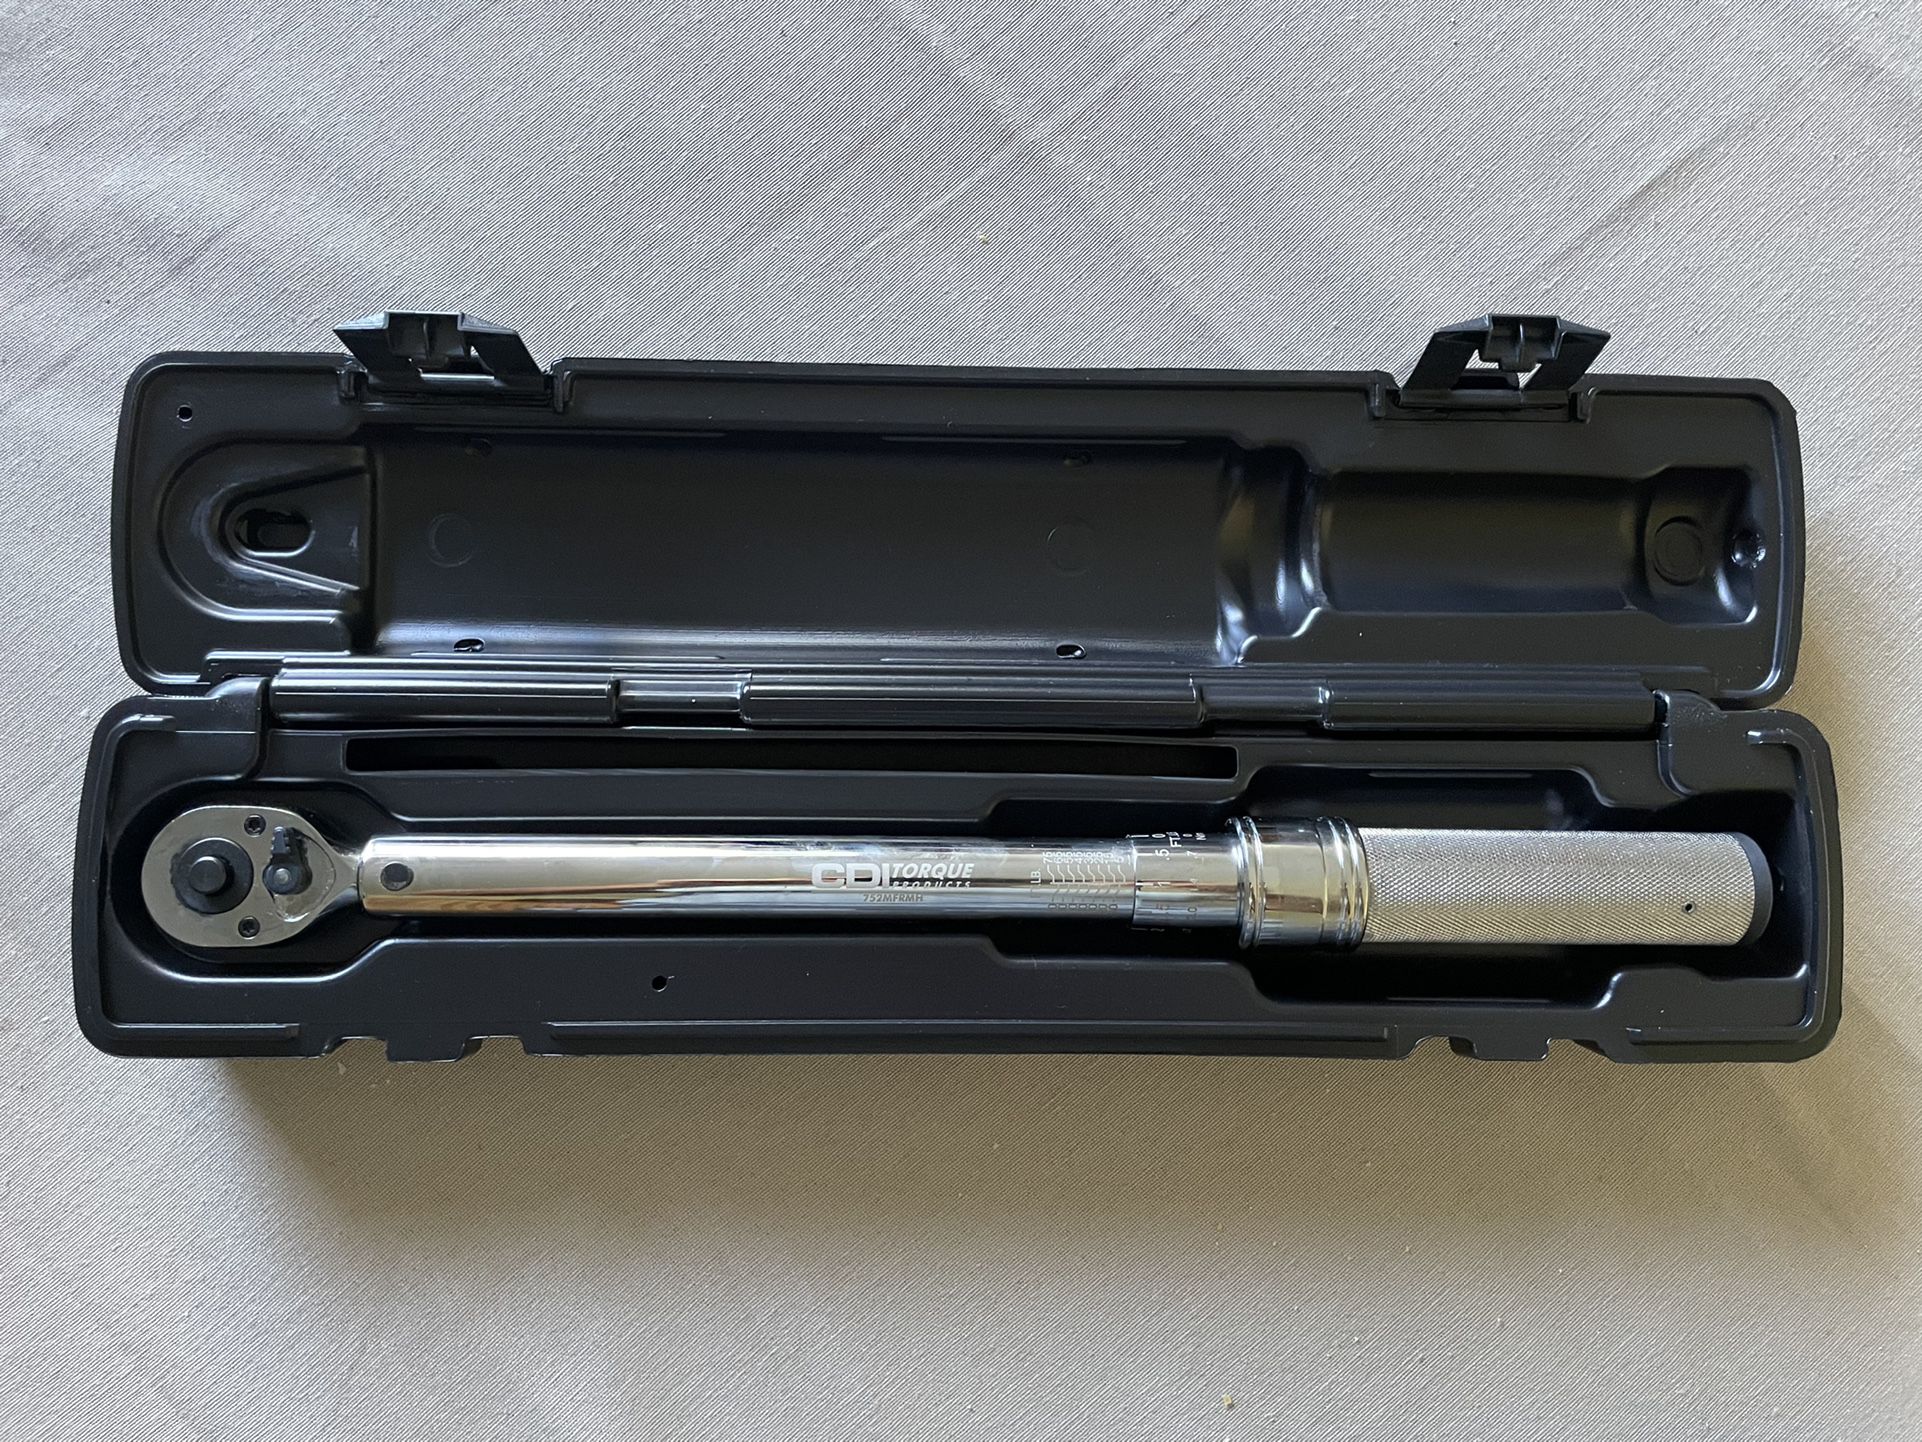 CDI Torque Wrench (A Snap-On Company)